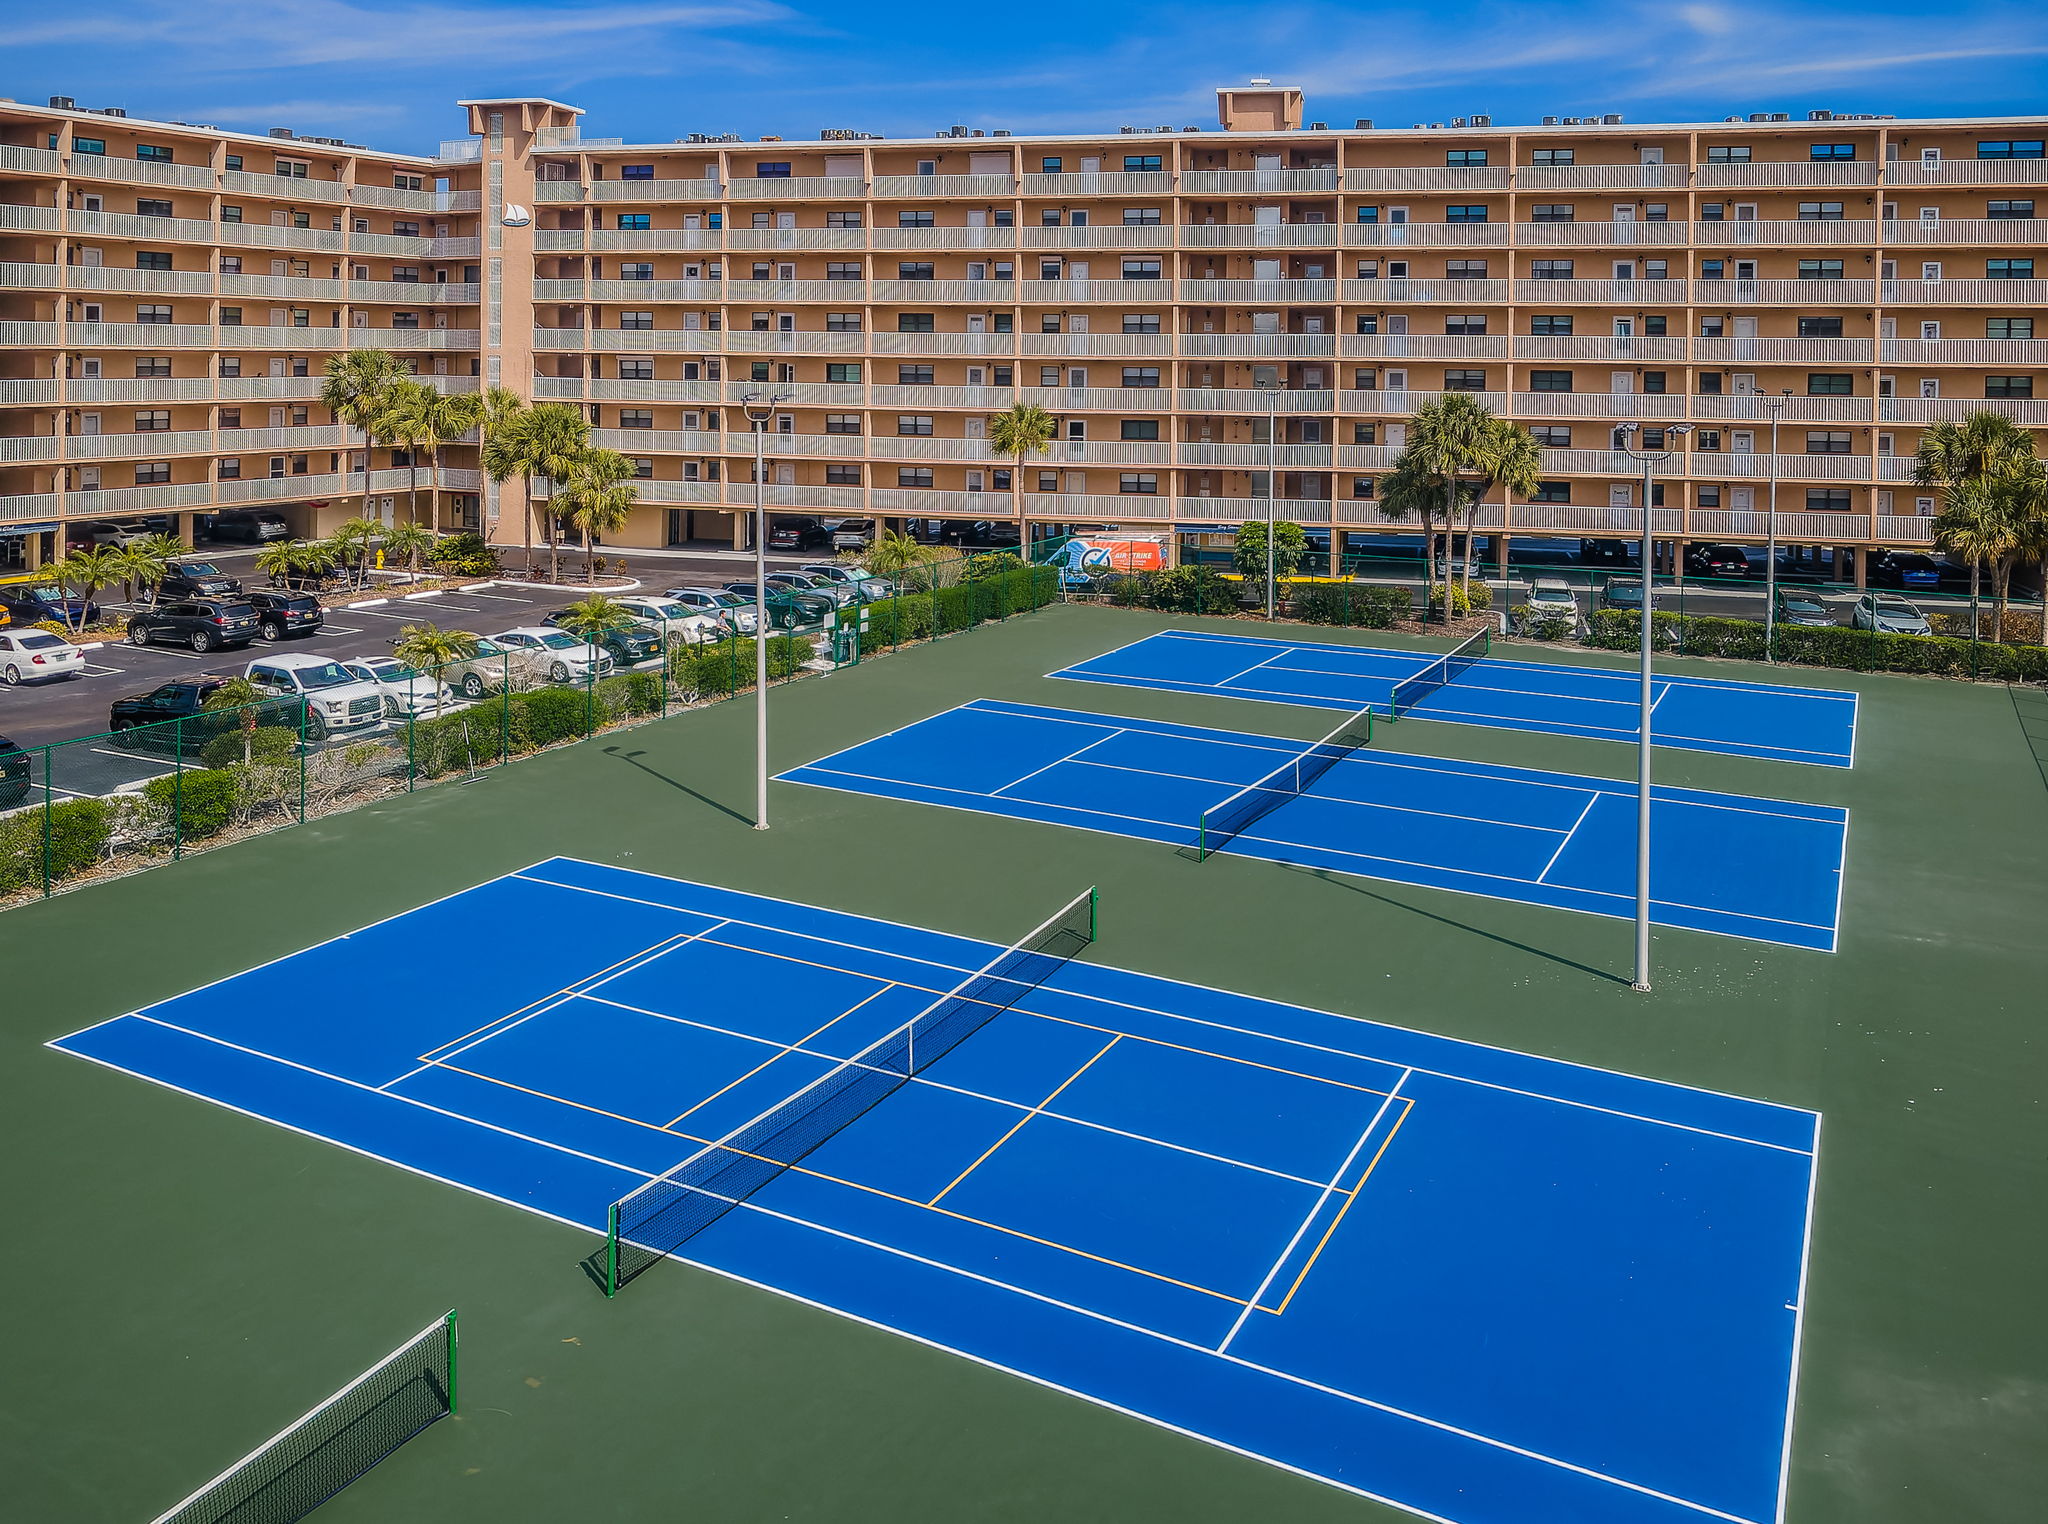 Tennis and Pickleball Courts26